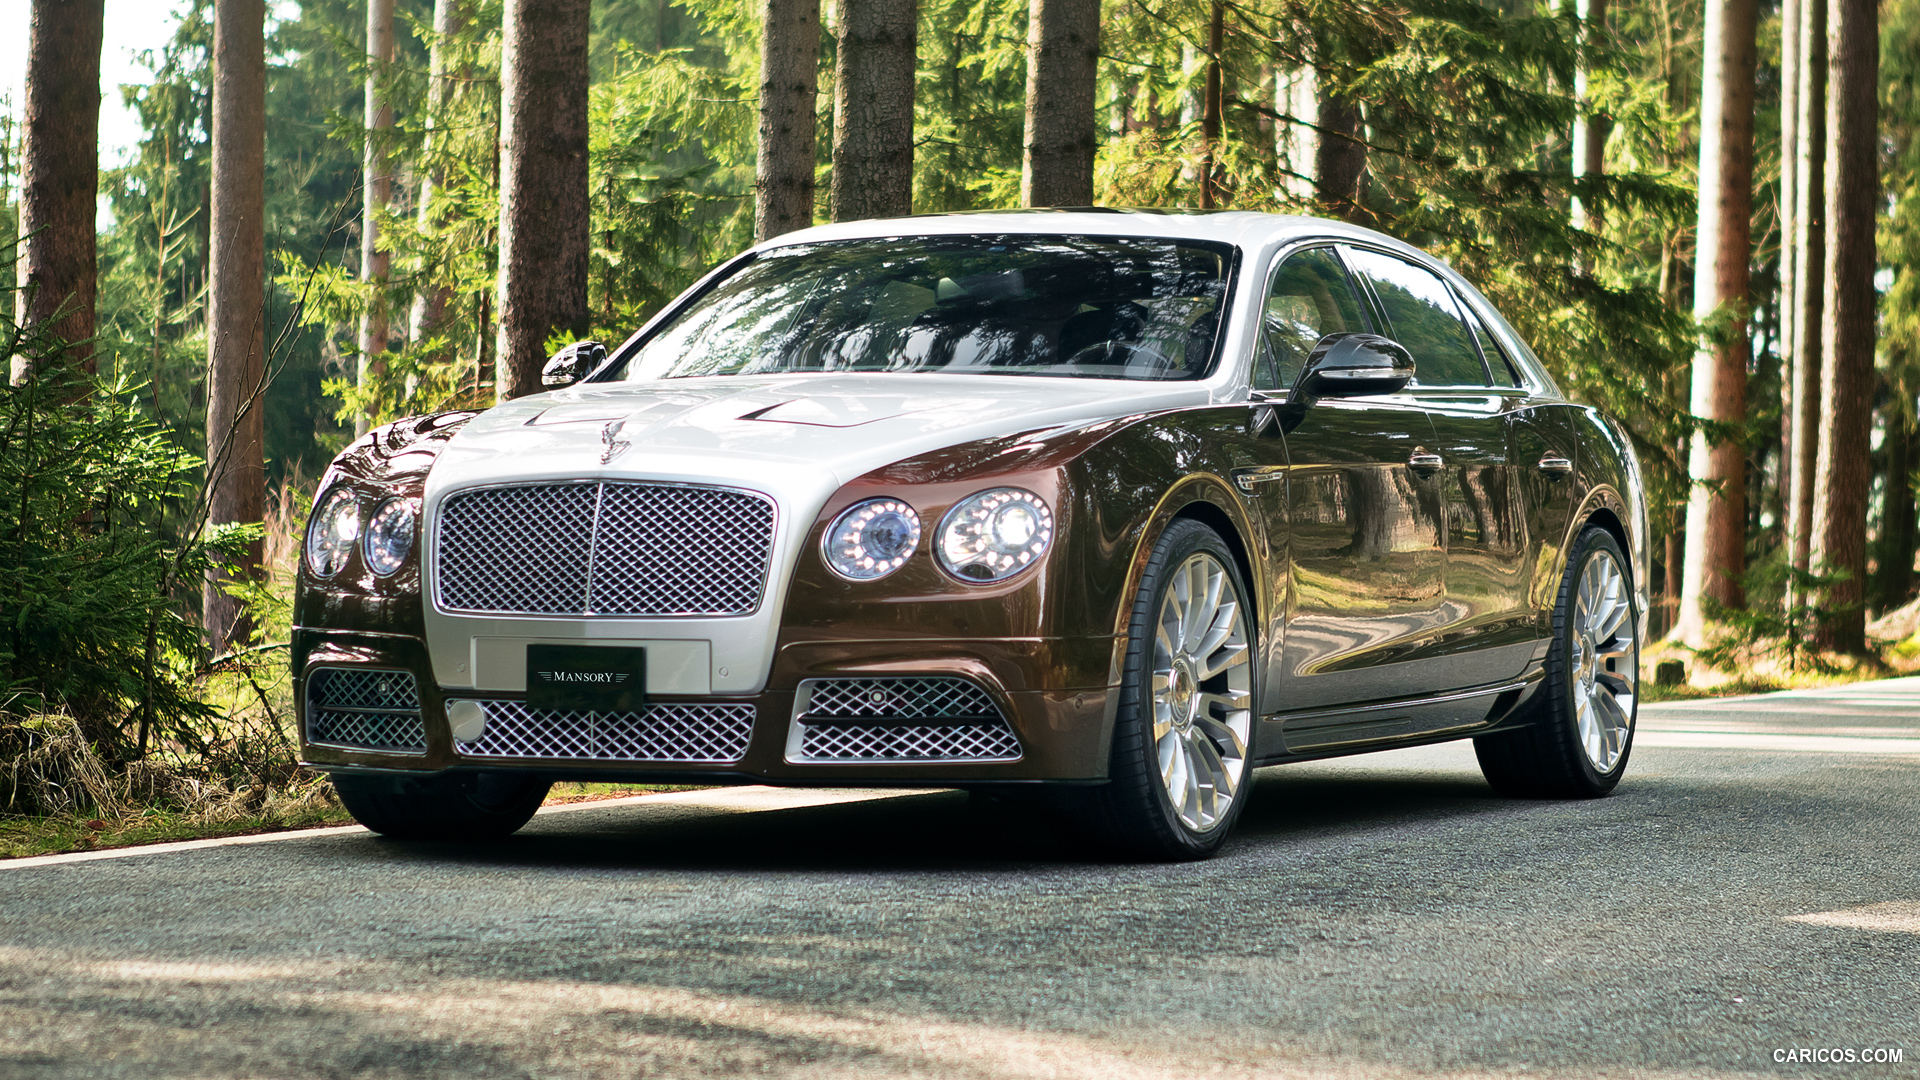 2014 Mansory Bentley Flying Spur  - Front, #3 of 8